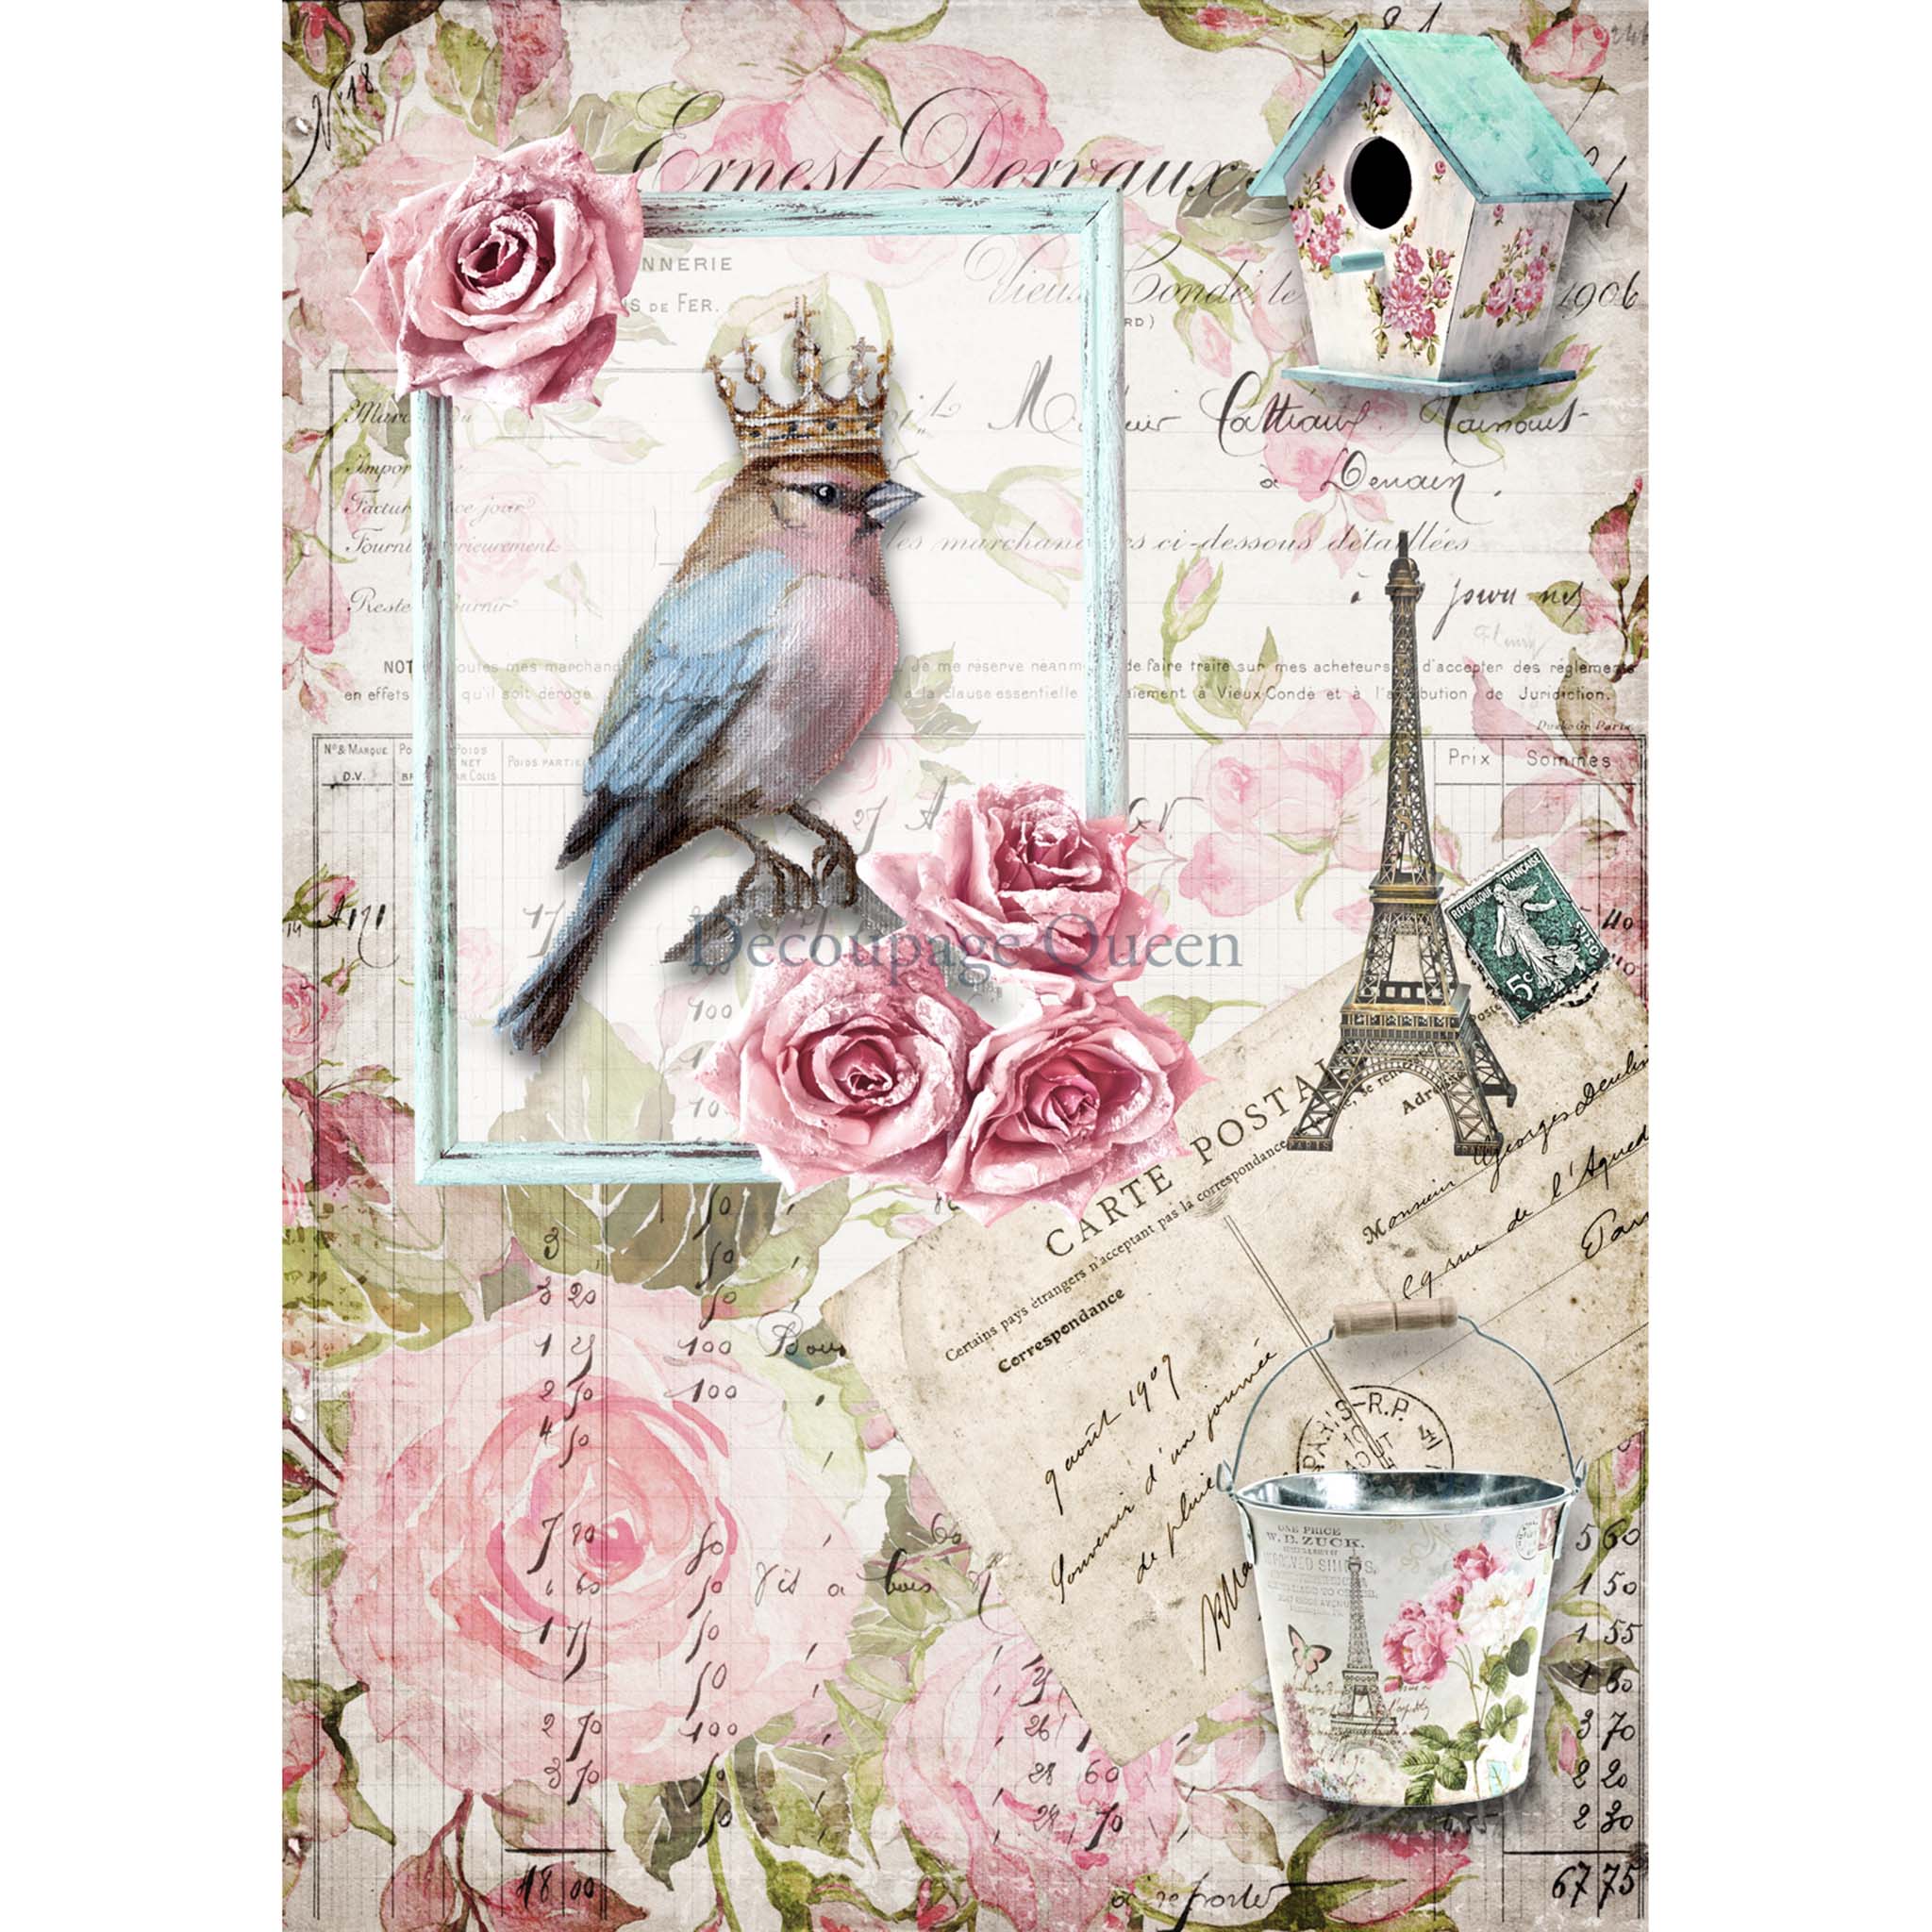 A4 rice paper design that features a small bird wearing a crown perched in a picture frame, surrounded by iconic Parisian elements like the Eiffel Tower, a birdhouse, and a French postcard against a floral background. White borders are on the sides.